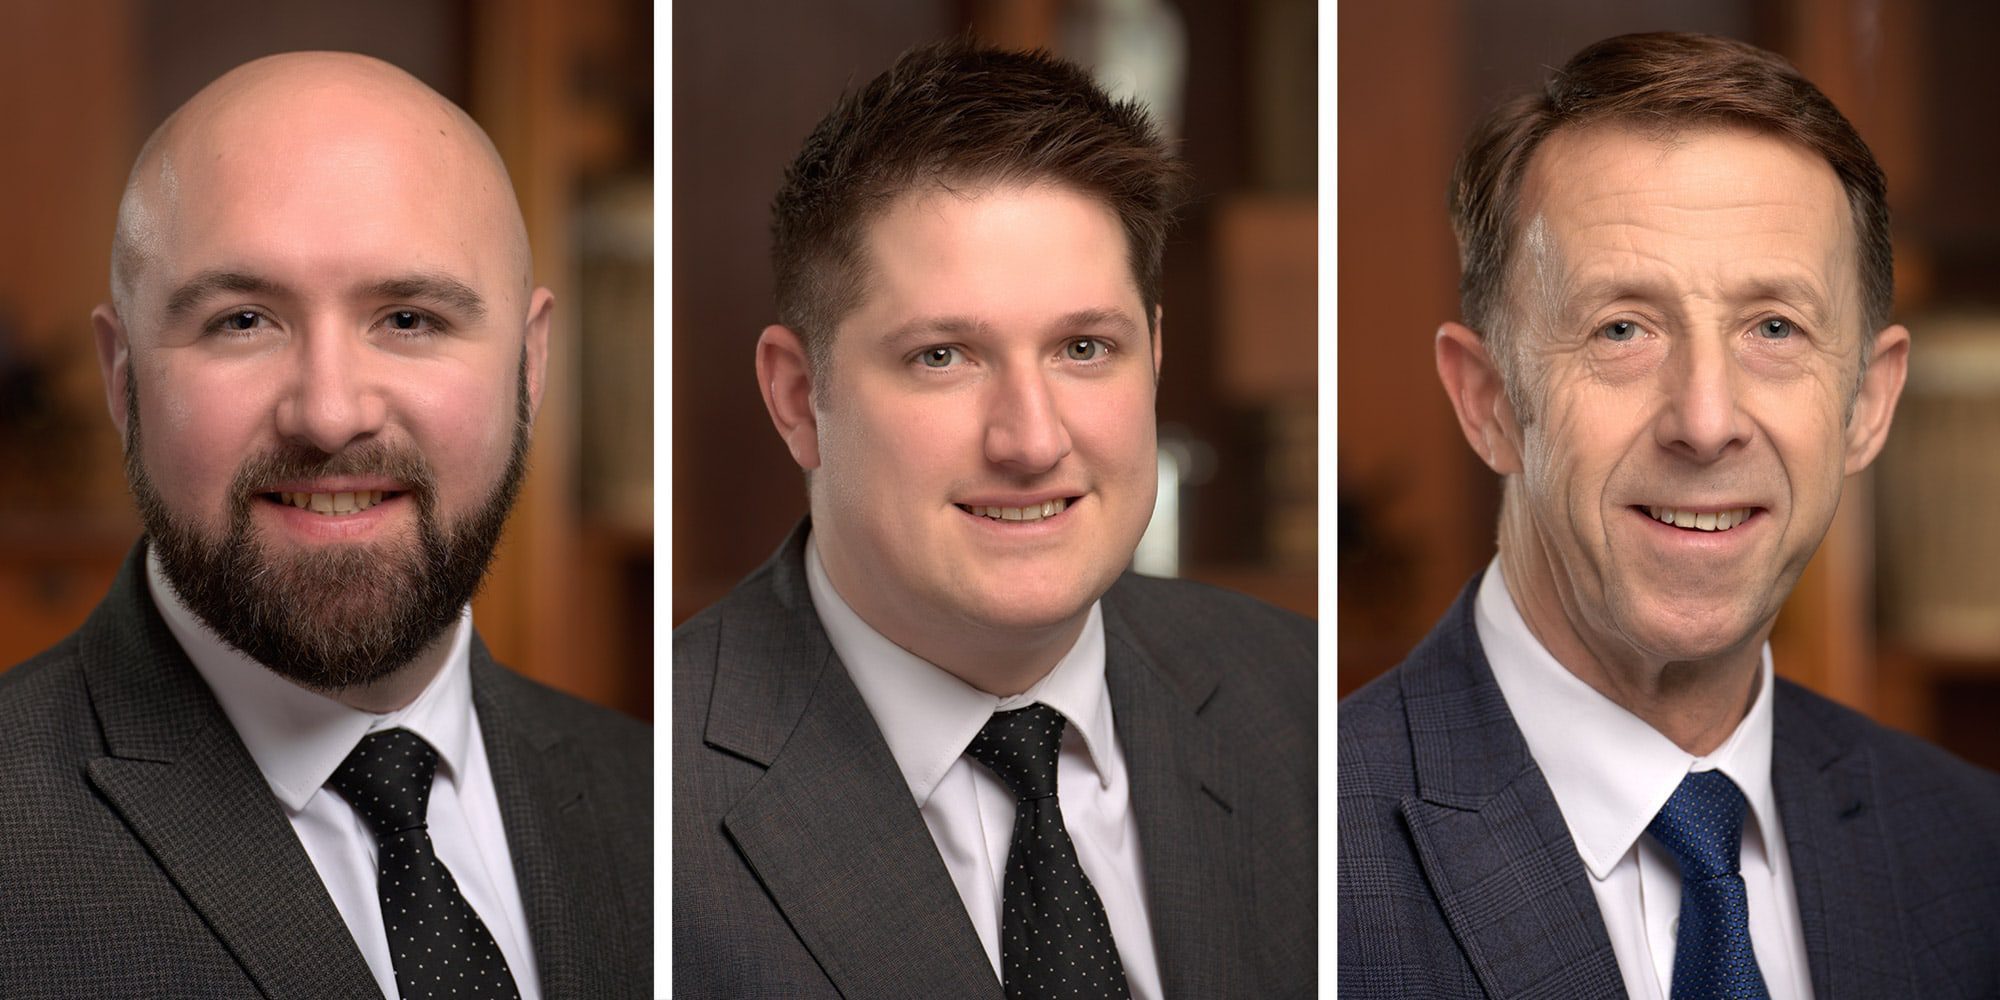 Three corporate headshots of men working for a funeral drector firm in Surrey.